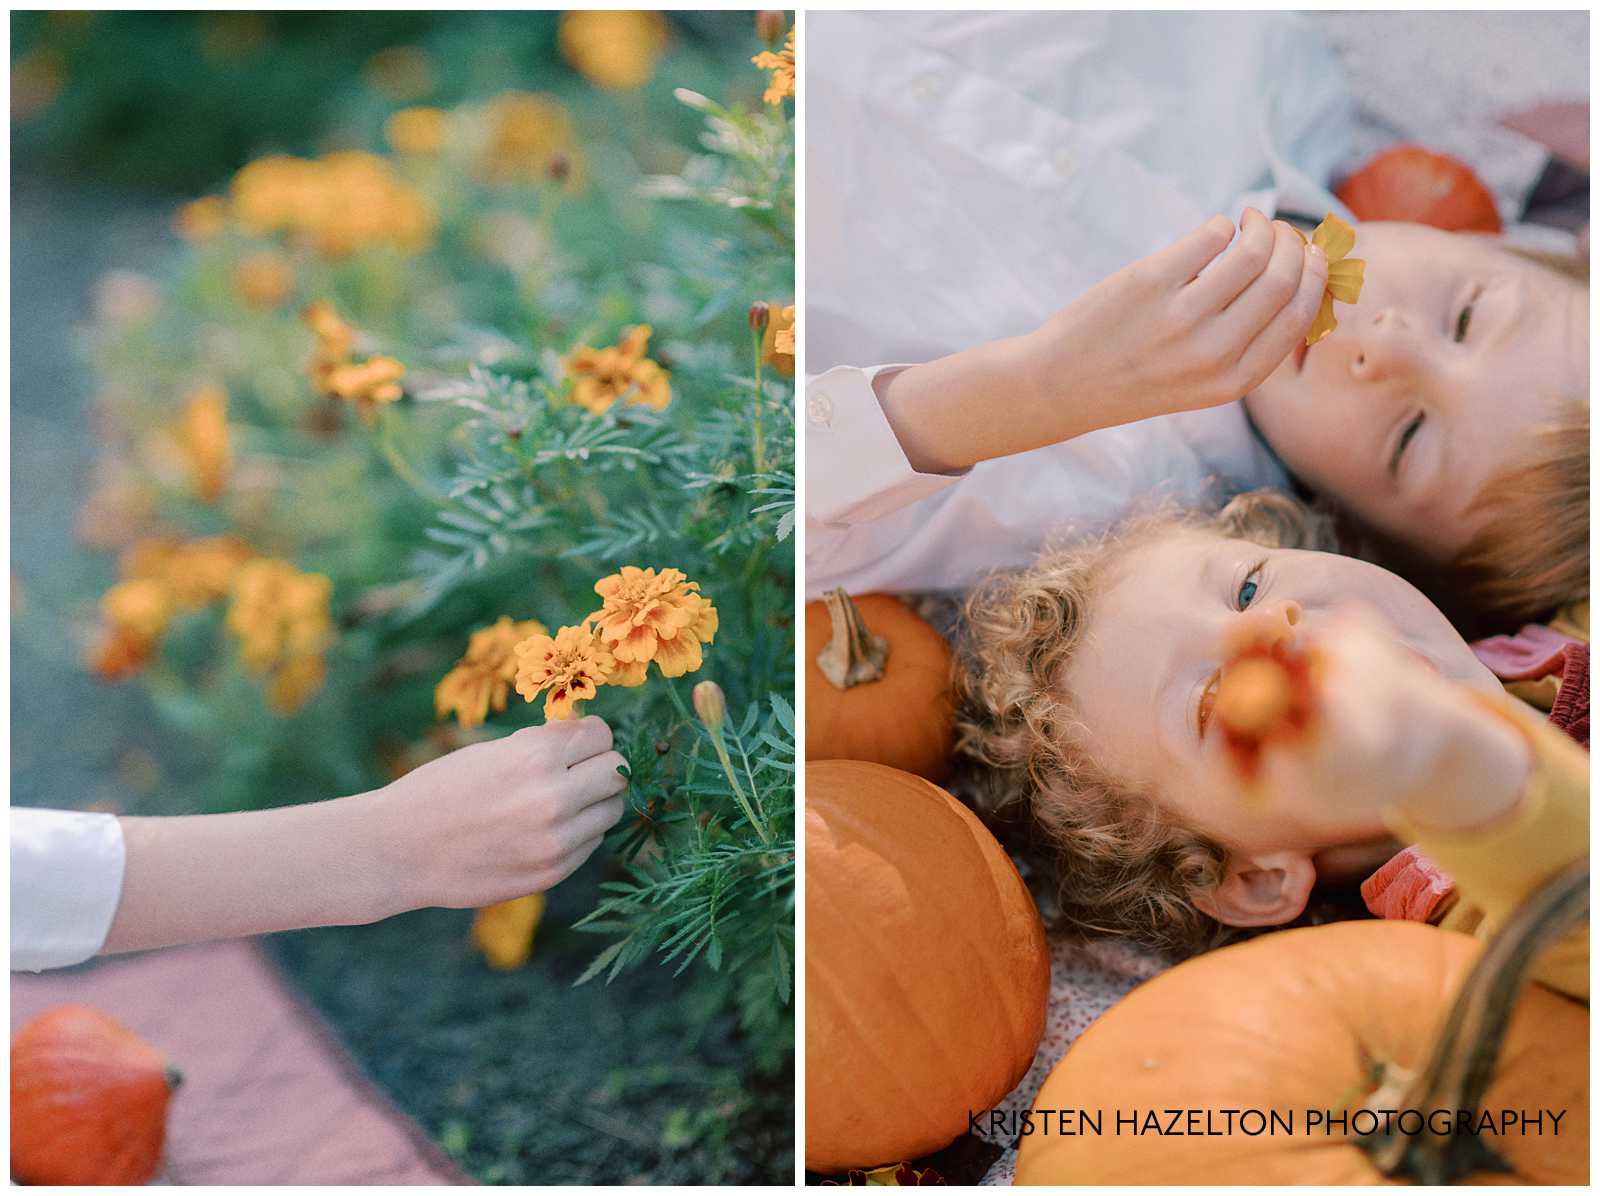 Little kids picking marigolds and sitting next to pumpkins from a farmers market in Chicago